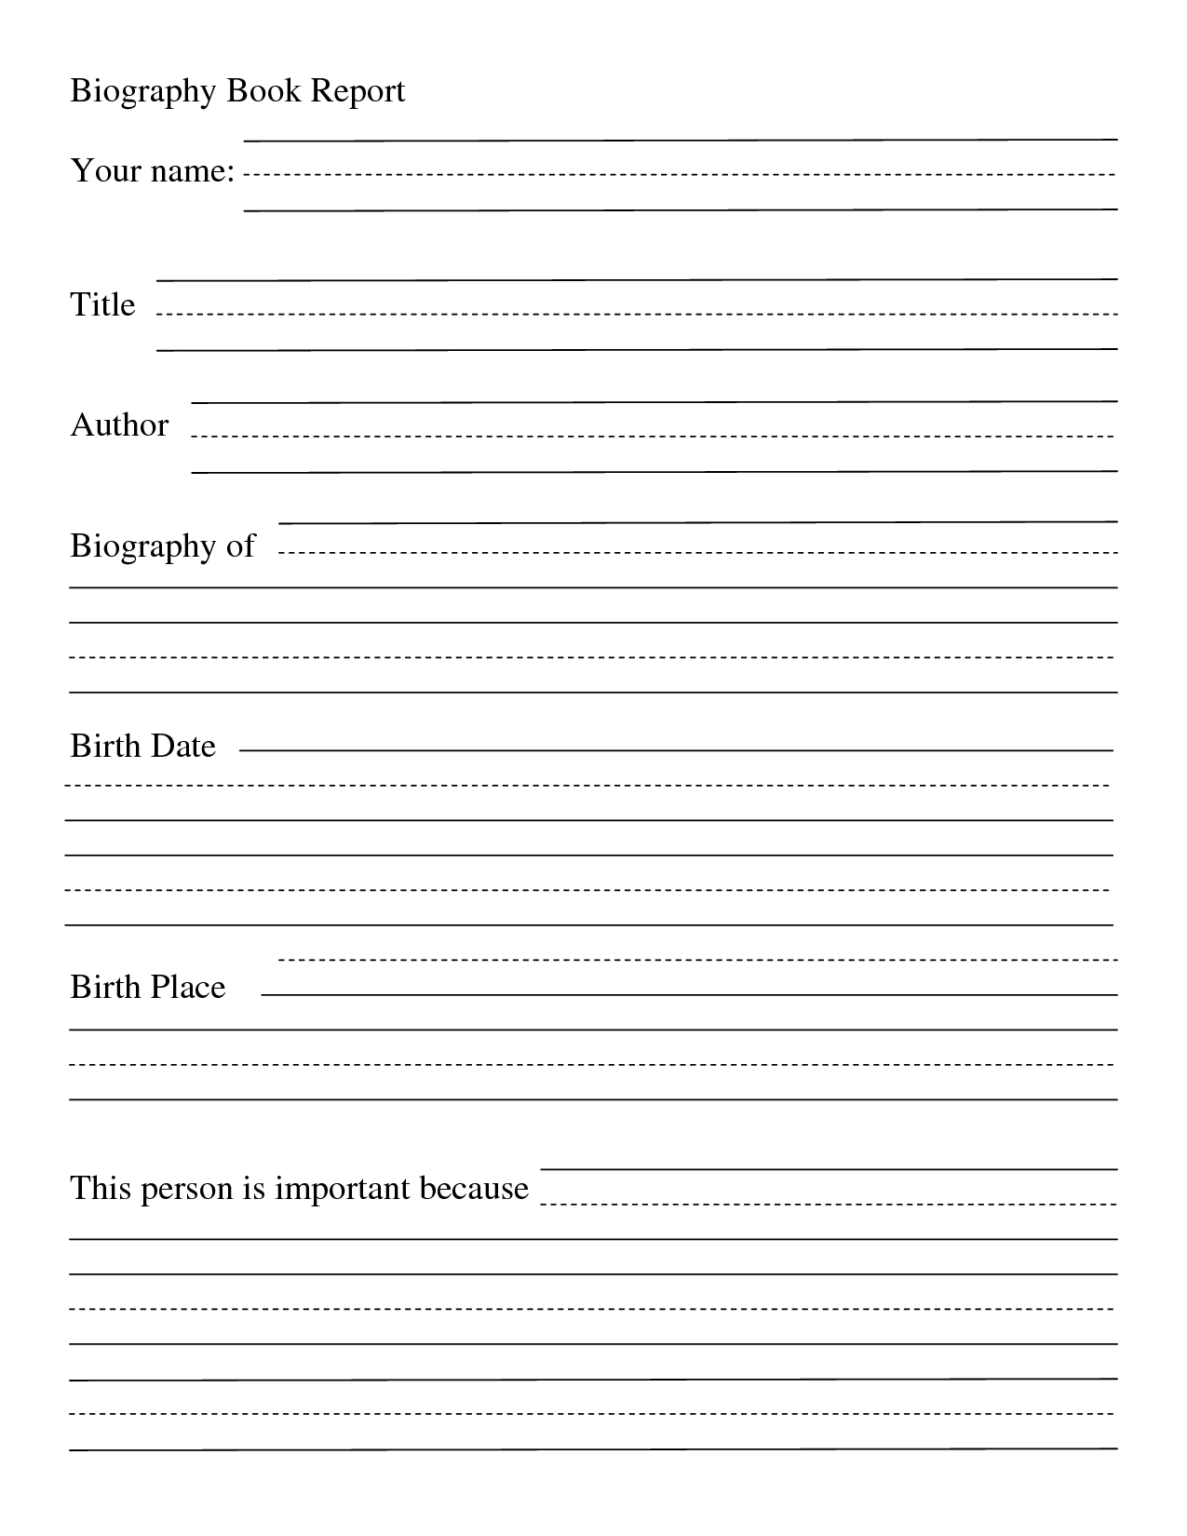 how to write a book report on a biography